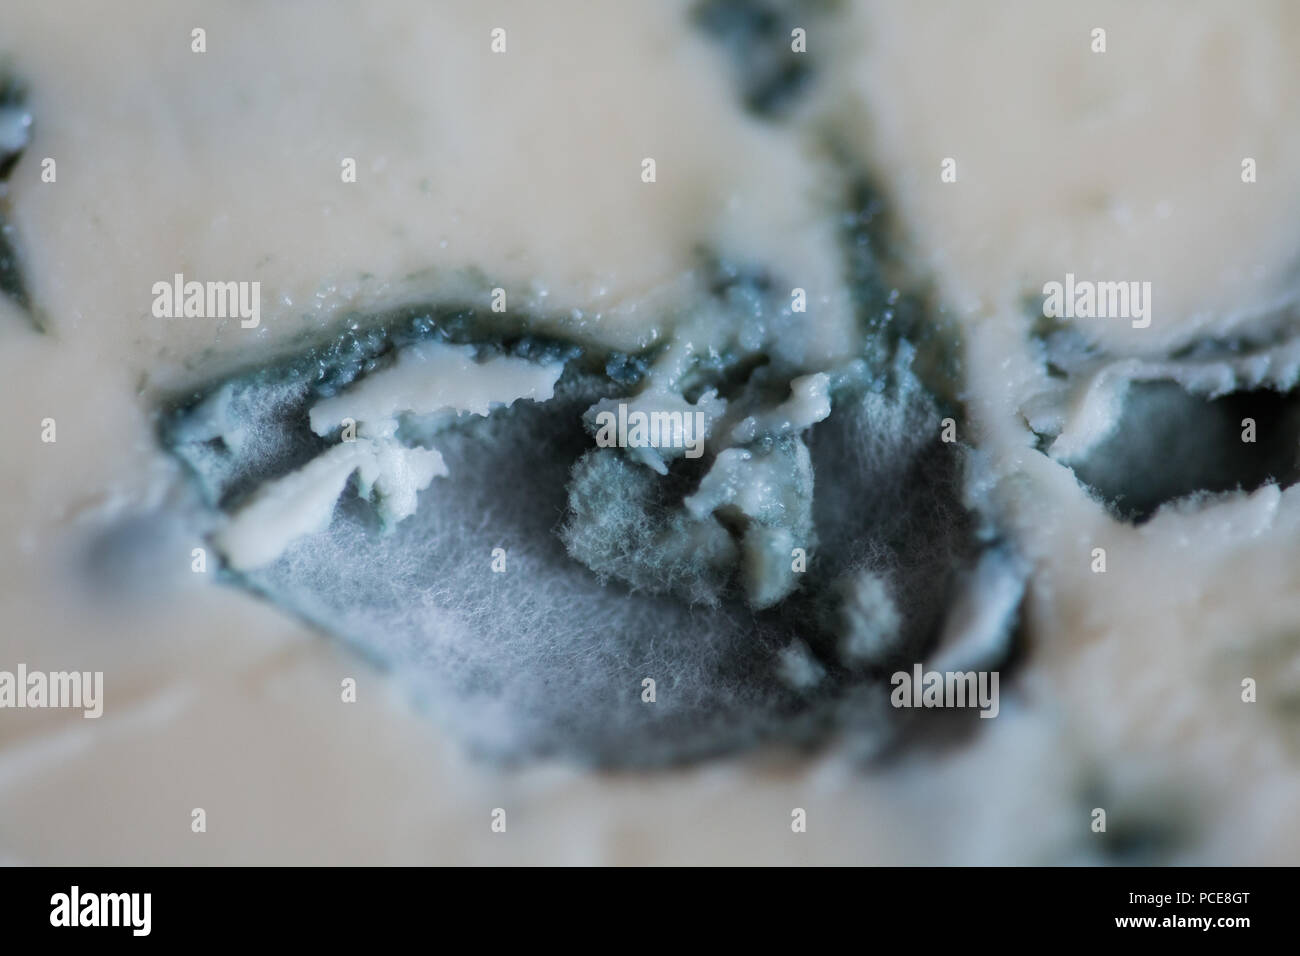 Close-up view of French froume d'Ambert blue cheese Stock Photo